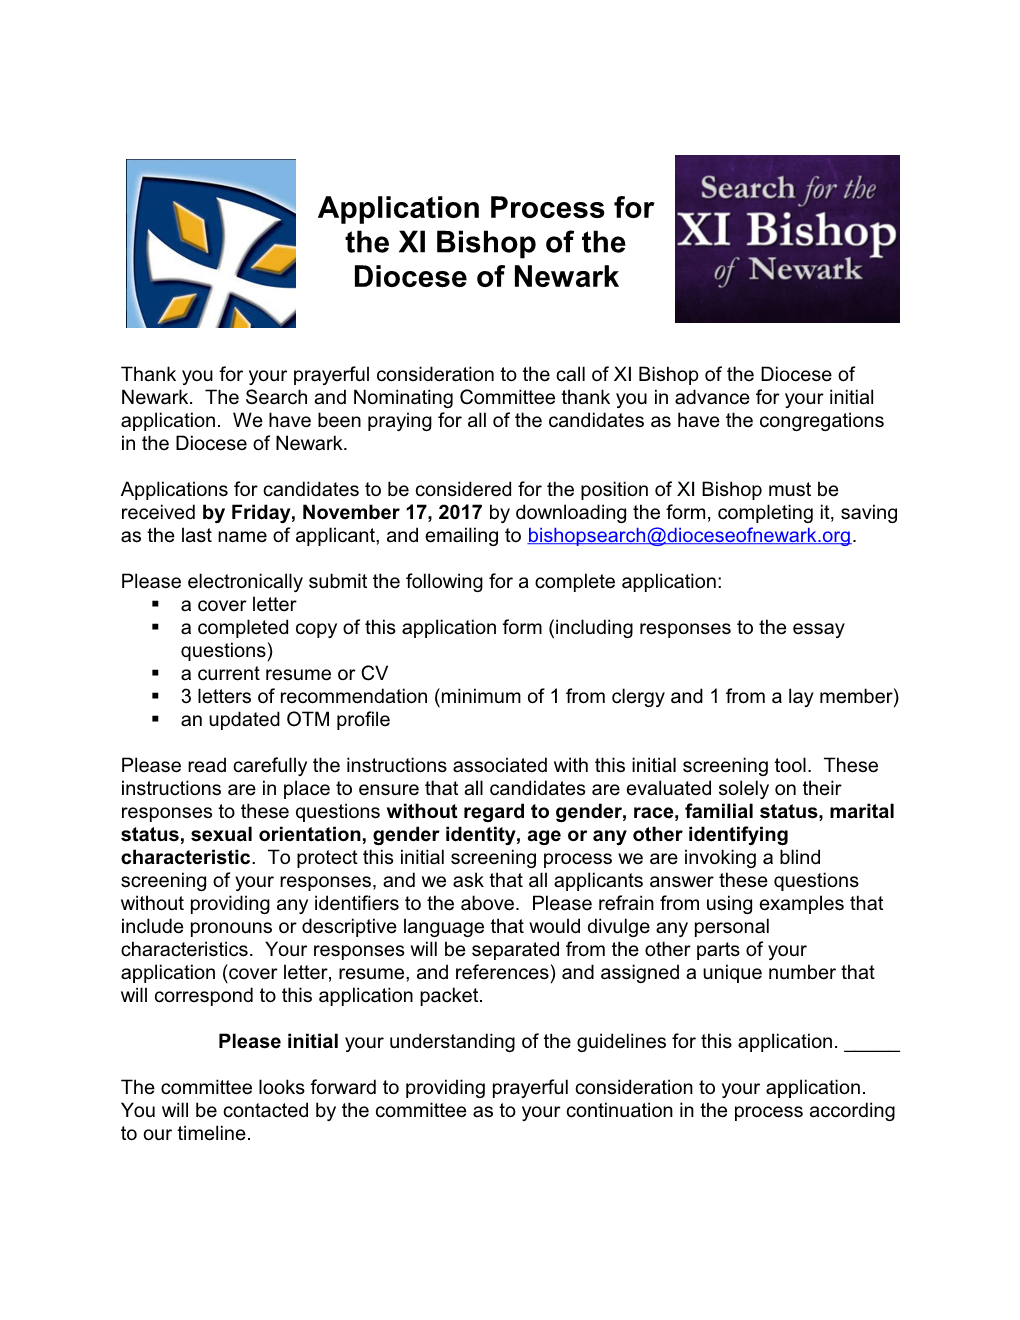 Application Process for the XI Bishop of the Diocese of Newark